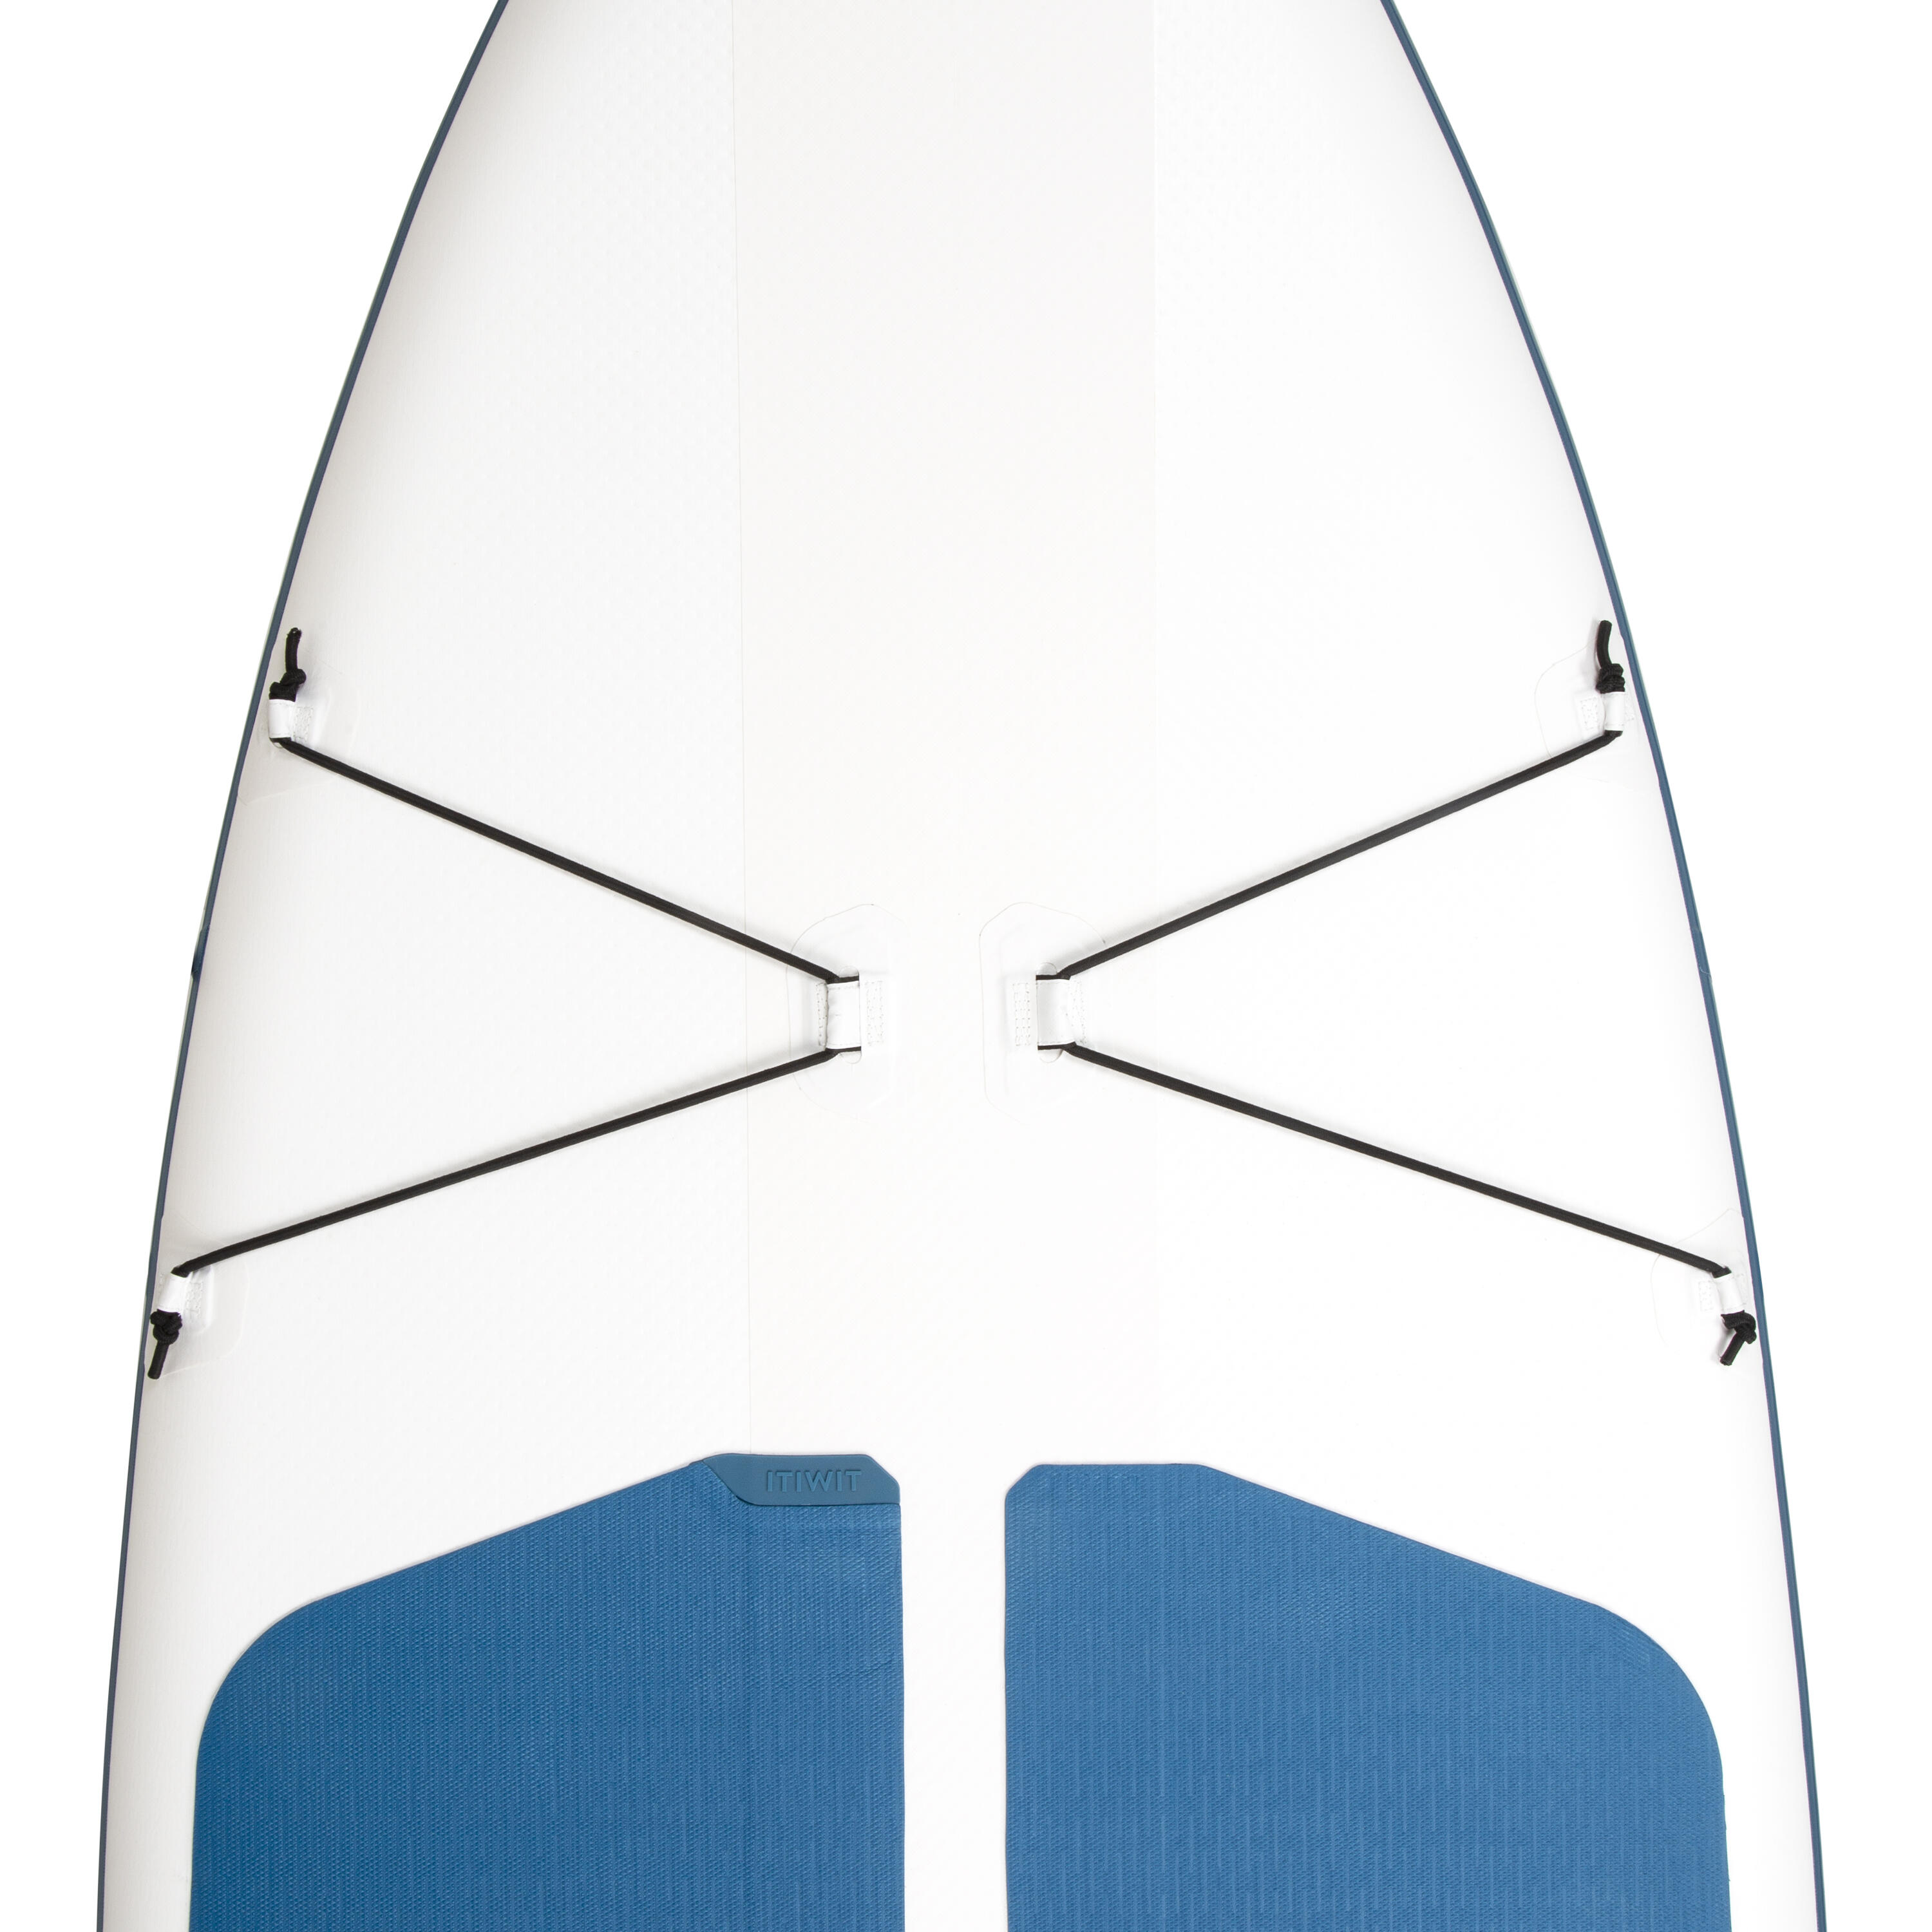 Ultra-compact and stable 10-foot (max. 130 kg) SUP - white and blue 11/29